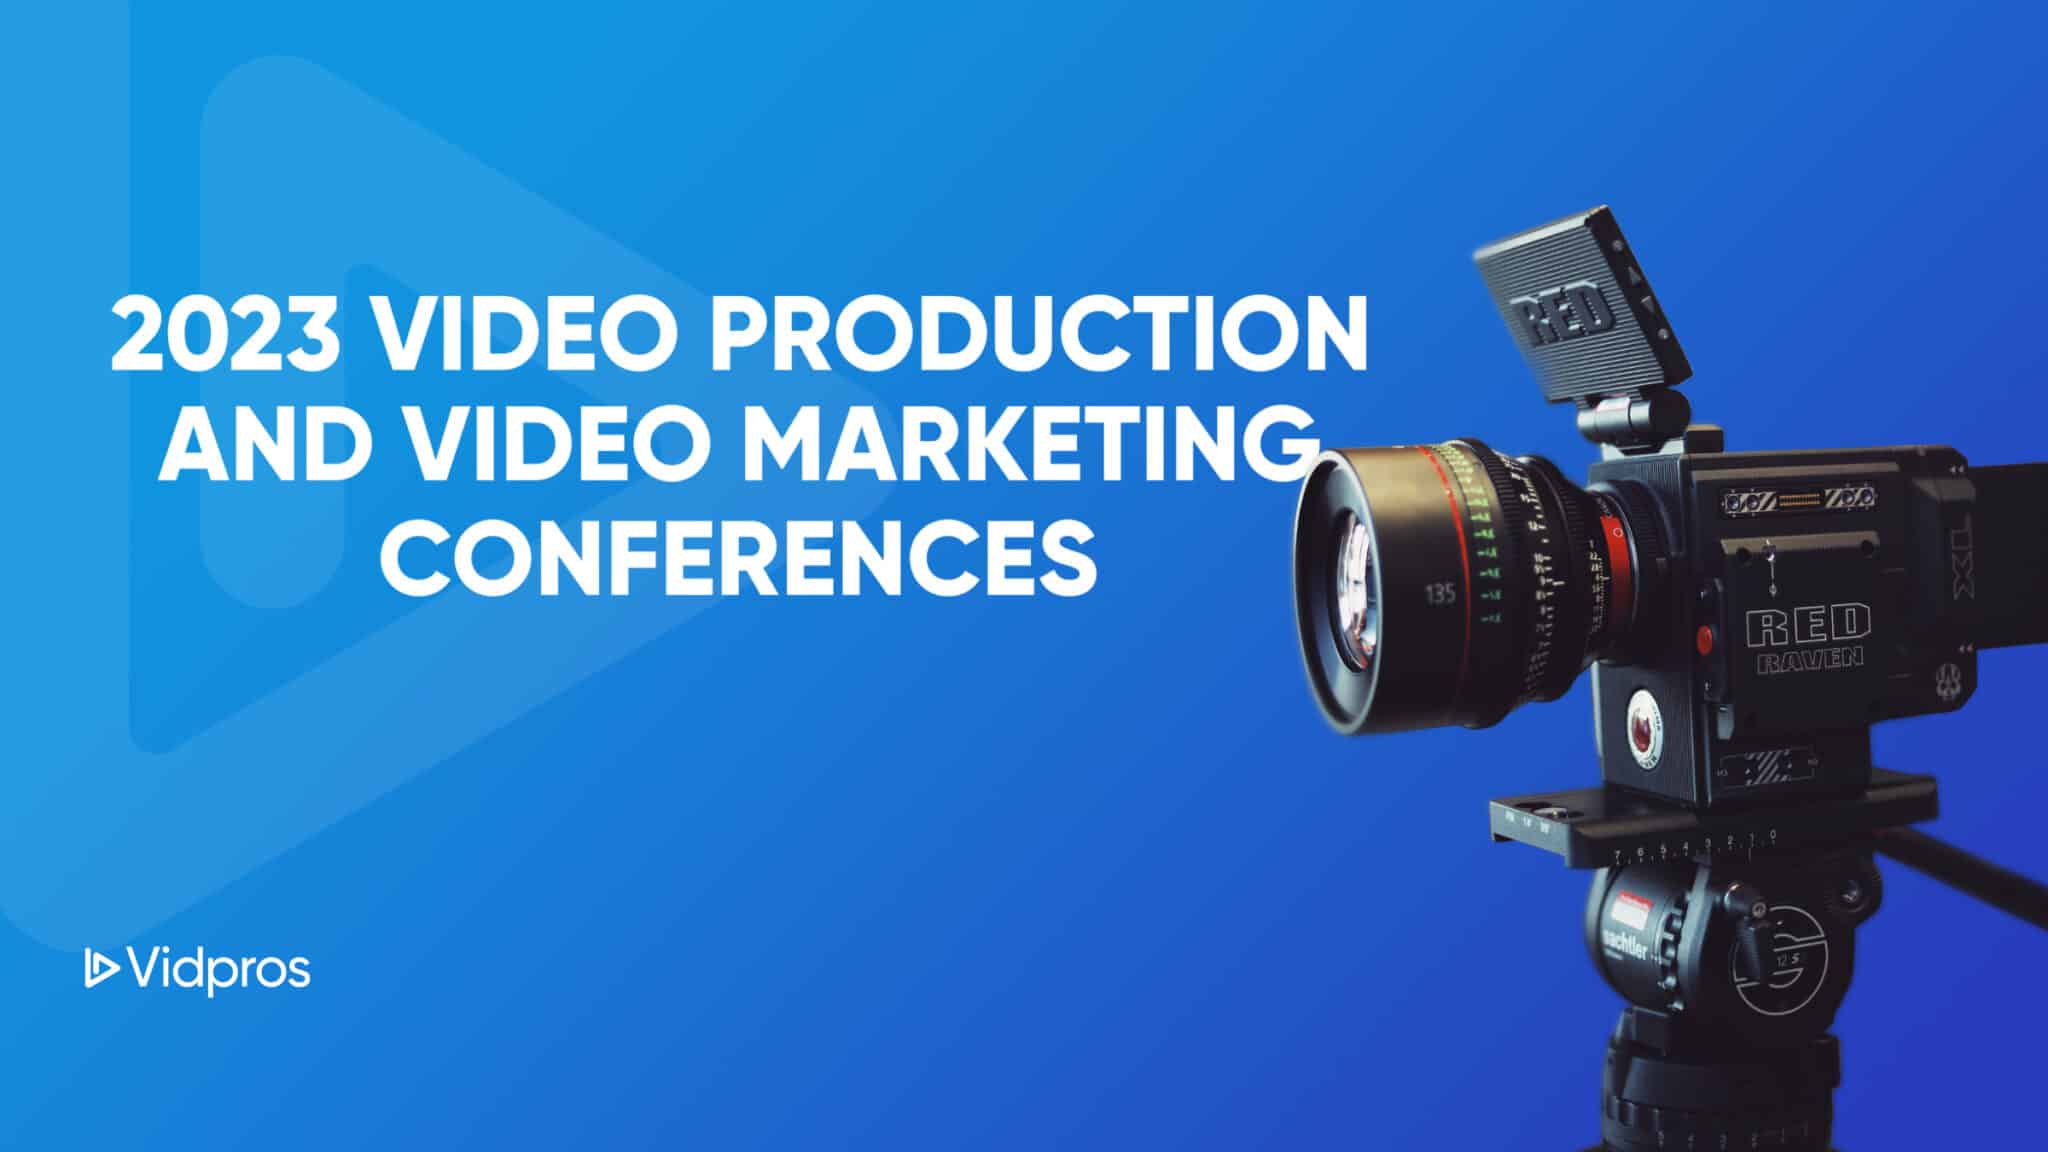 2023 Video Production and Video Marketing Conferences